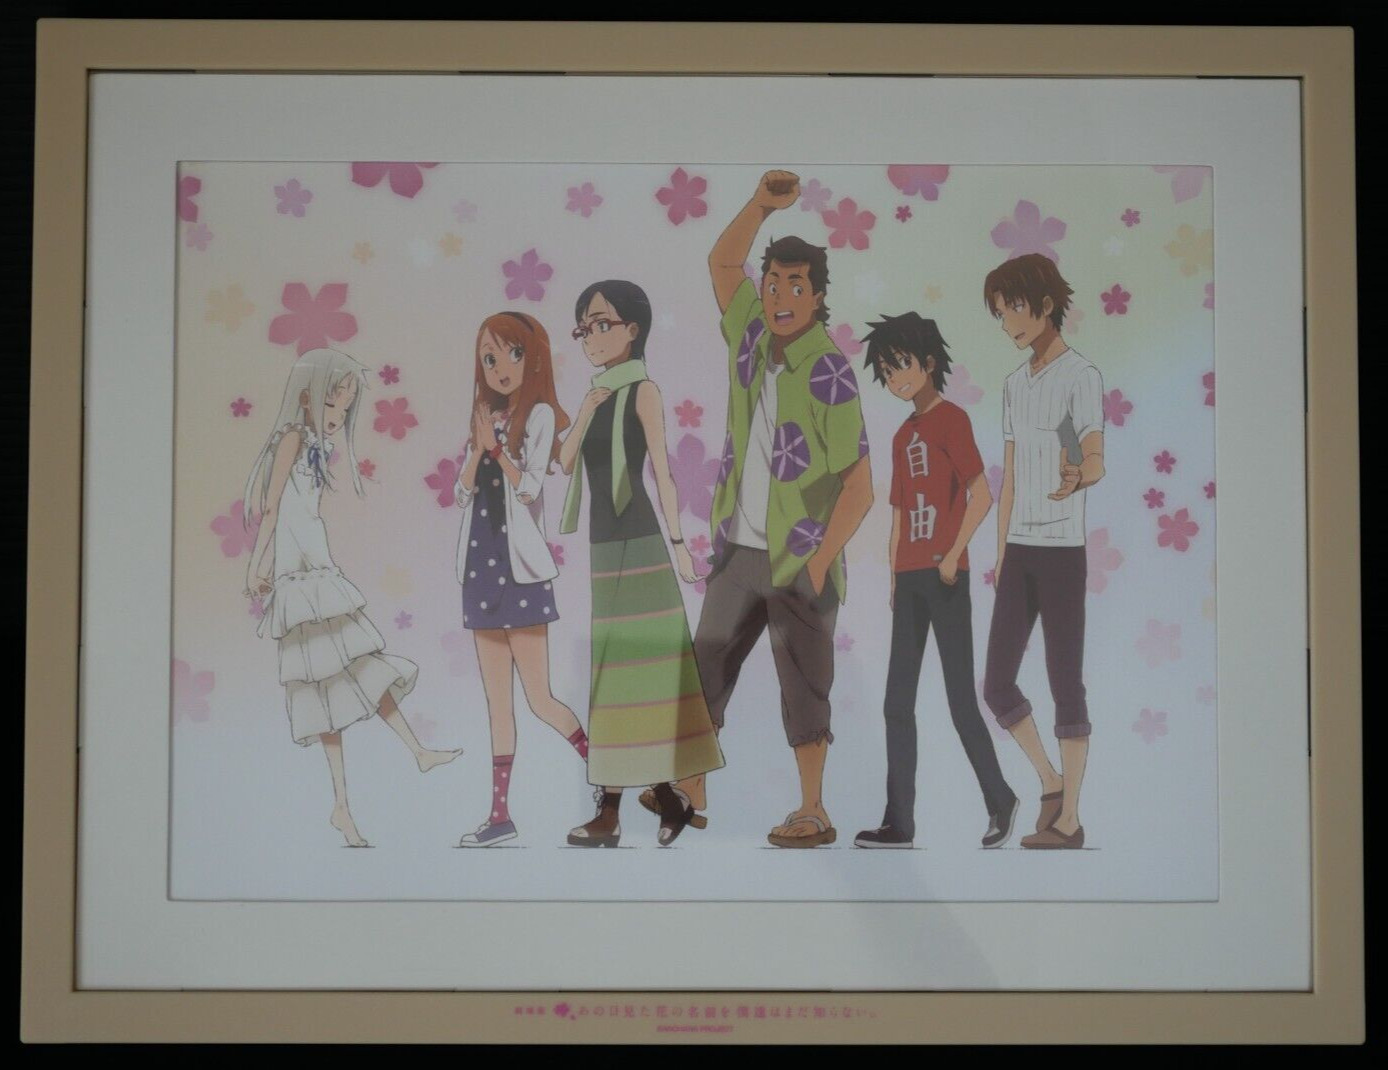 Anohana: The Flower We Saw That Day 5years After ver. Framed Illustration